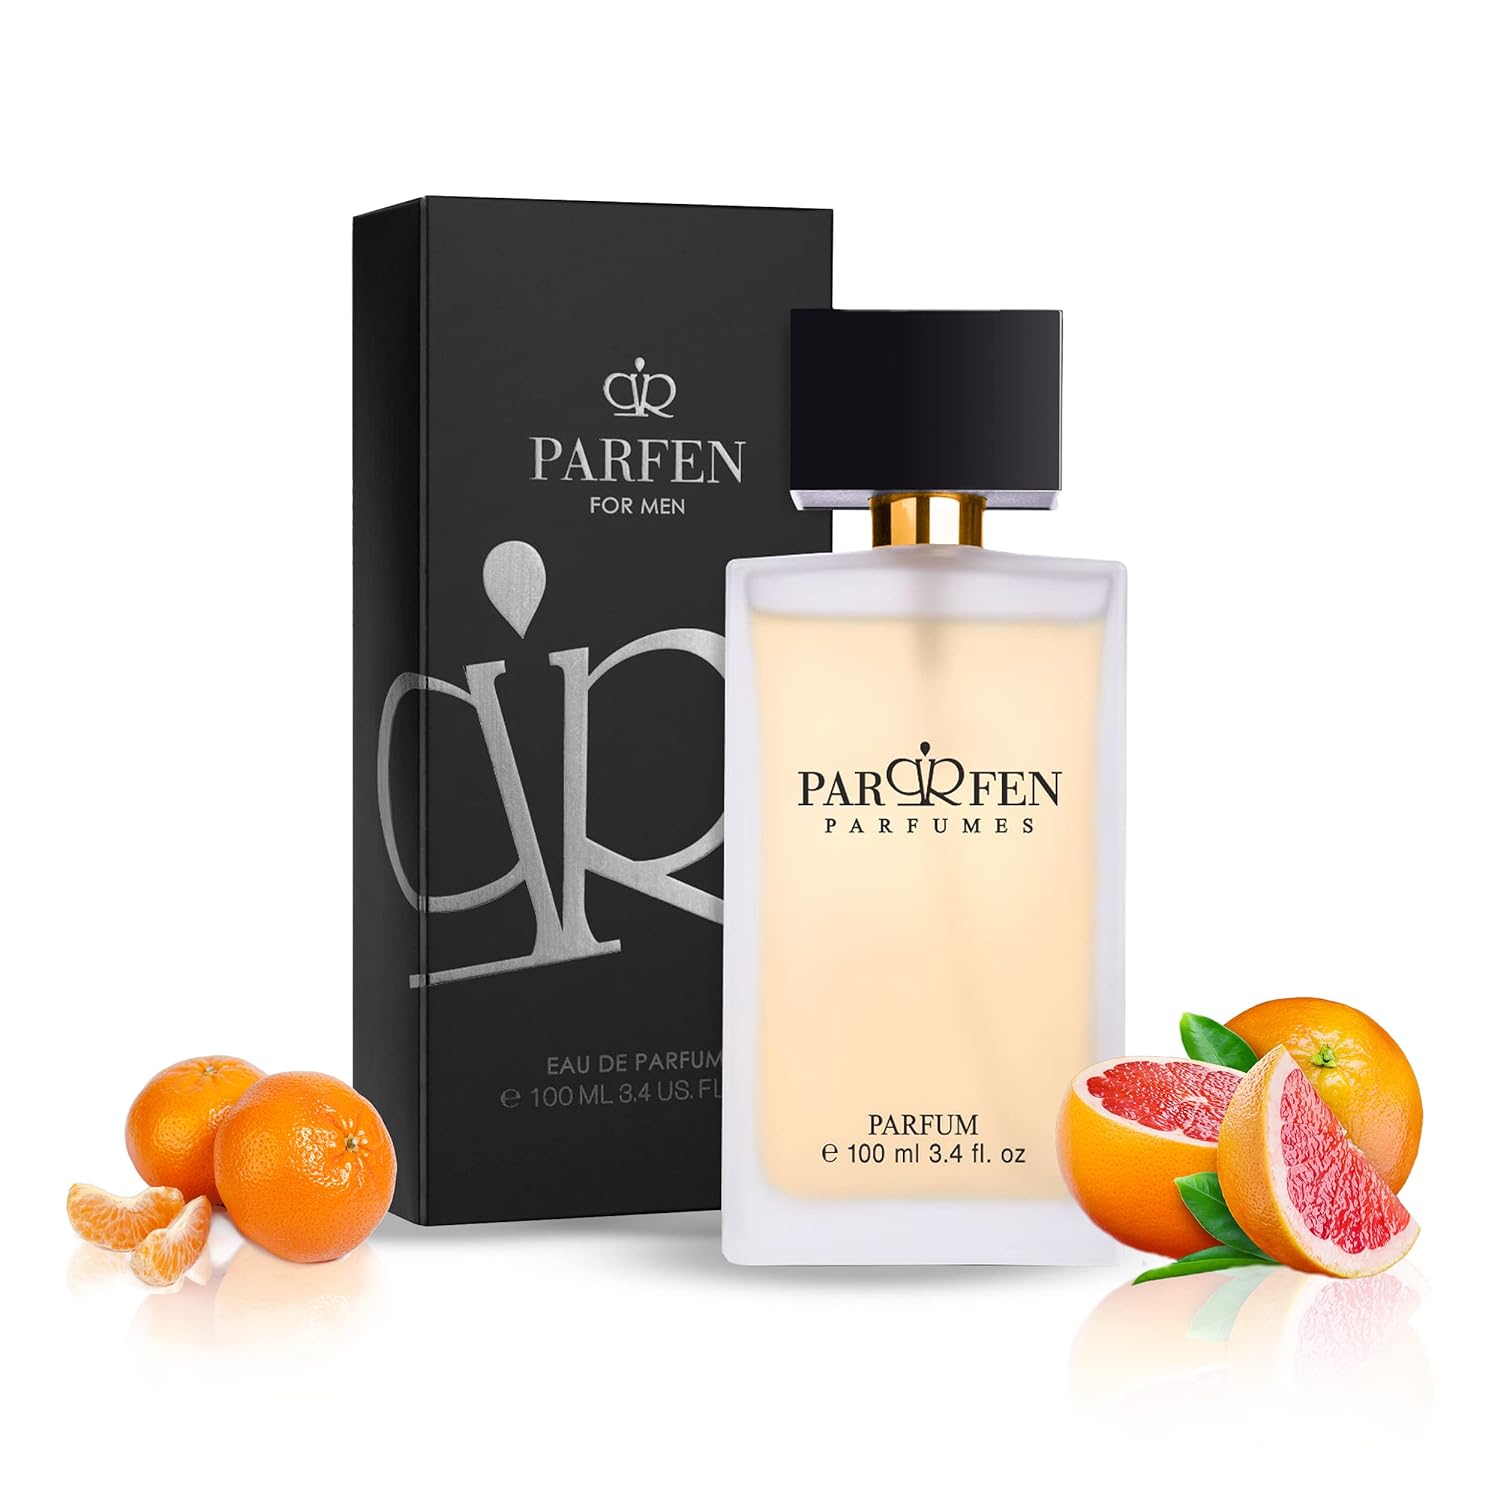 Parfen No. 646 Inspired by Invictus for Men, 1 x 100 ml, perfume dupe